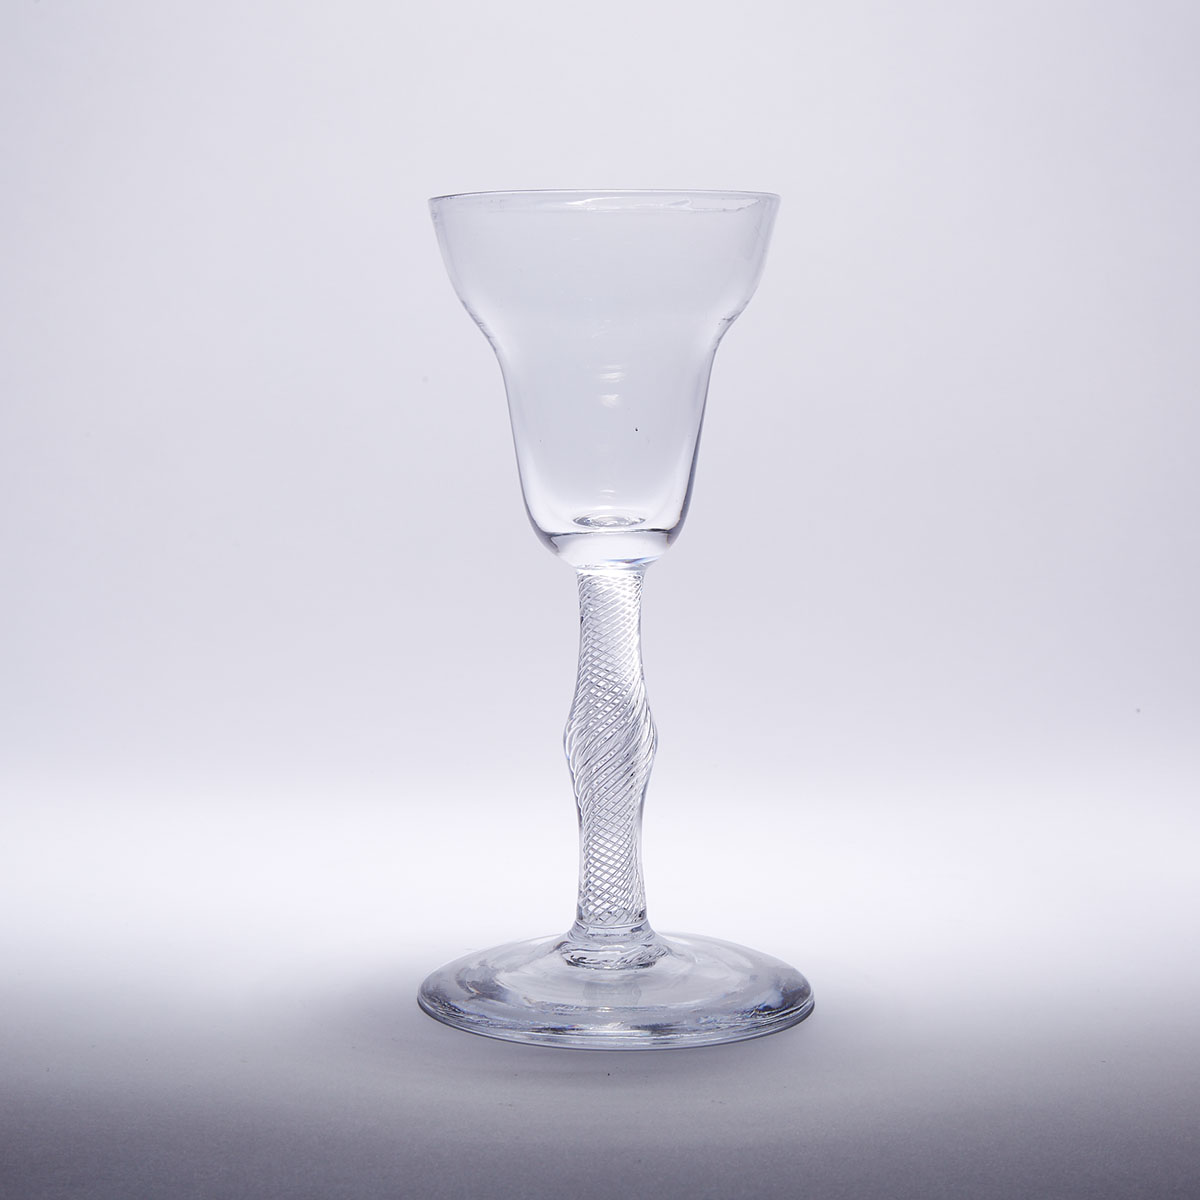 English Knopped Airtwist Stemmed Glass Goblet, mid-18th century